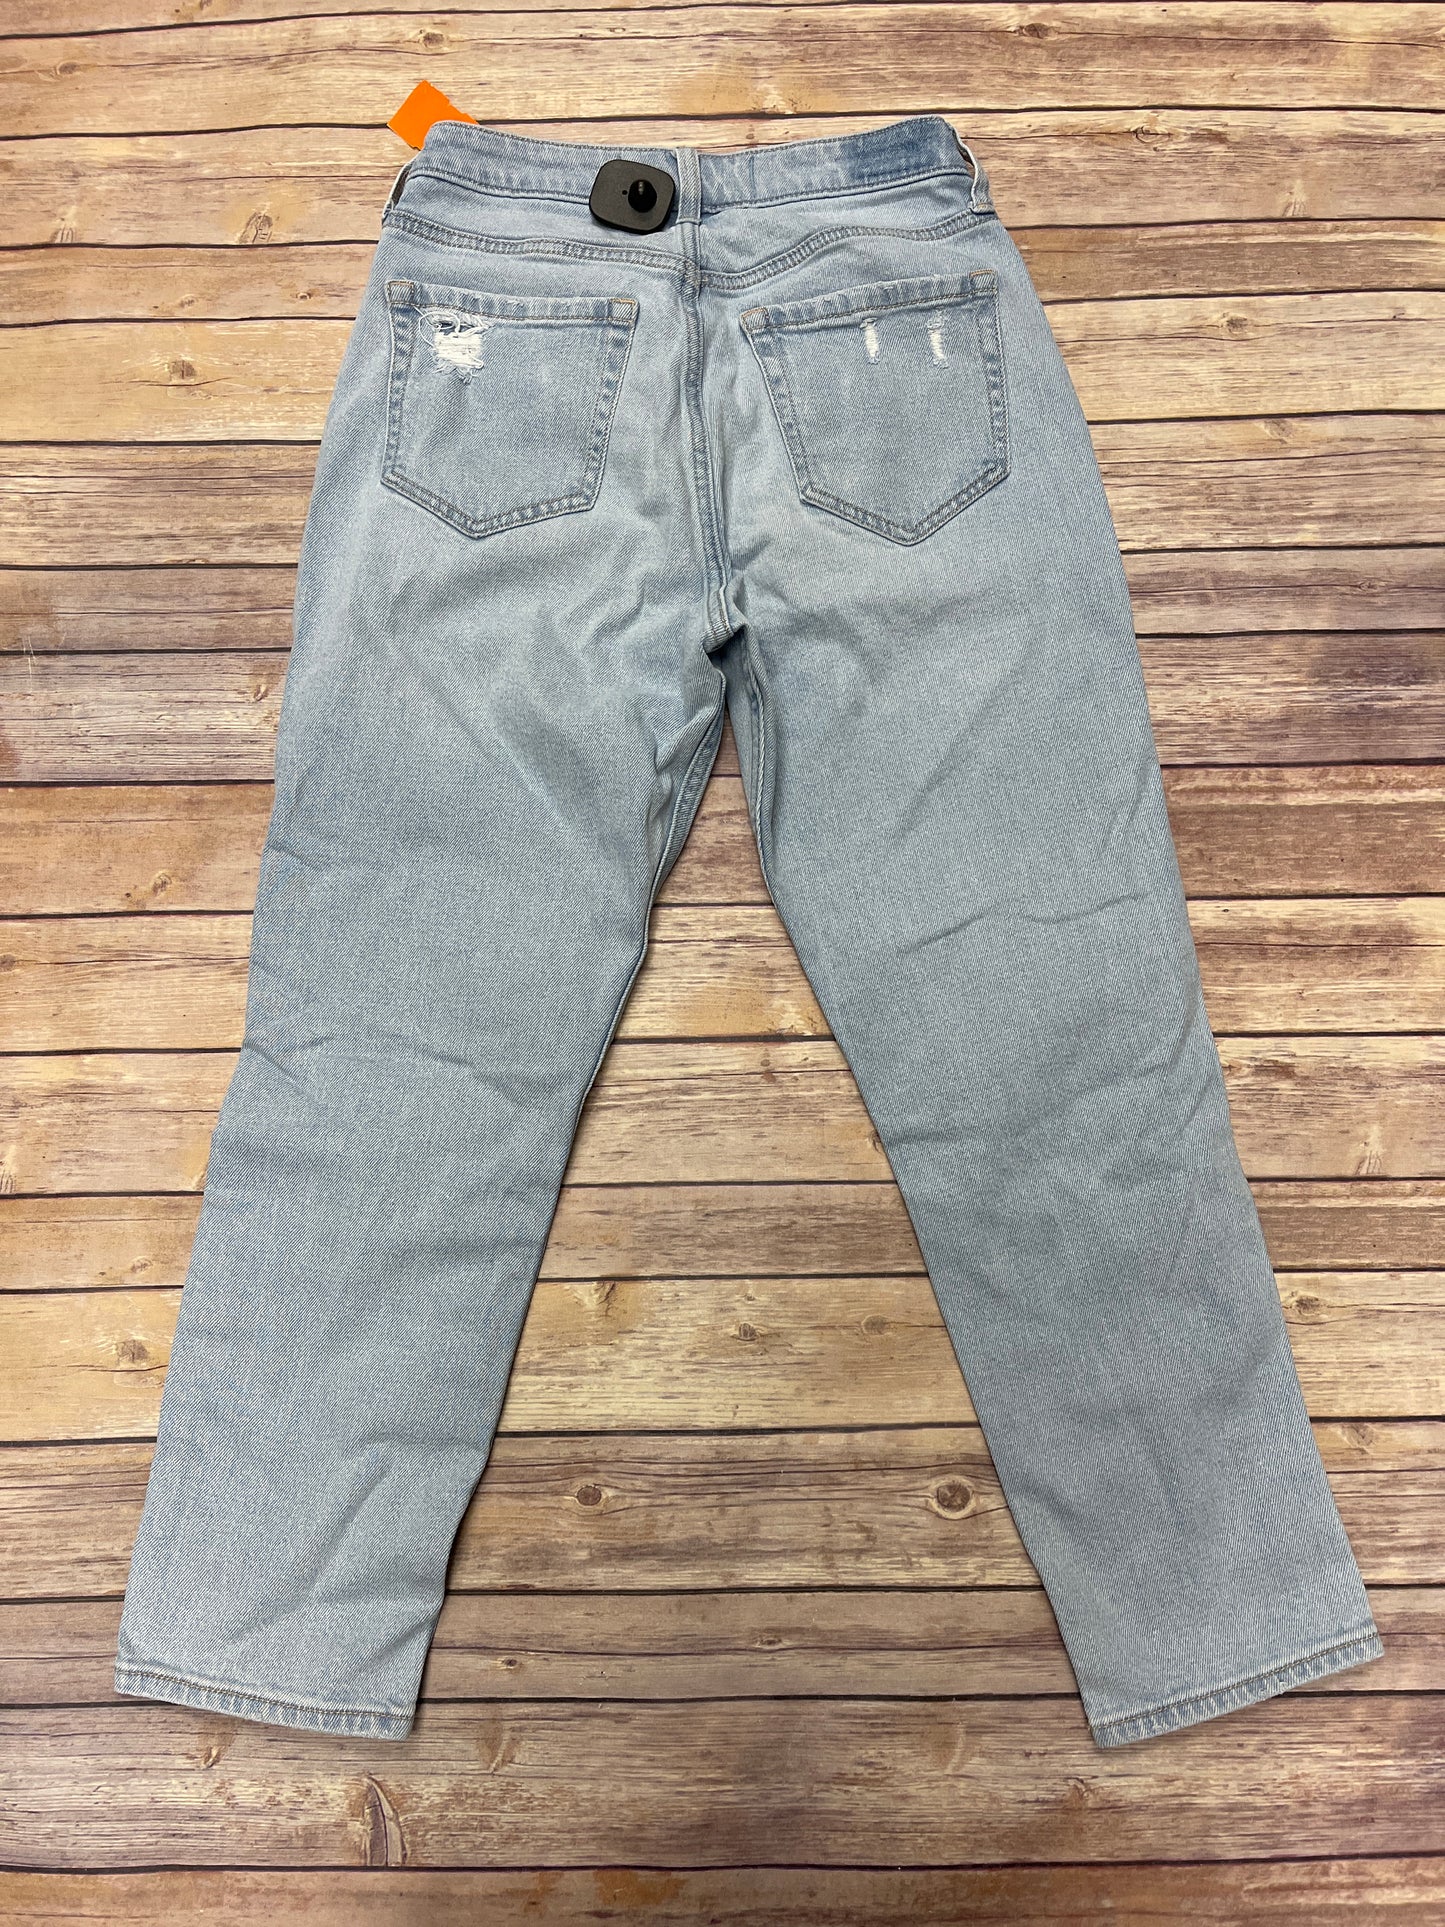 Jeans Skinny By Hollister  Size: 2 Short